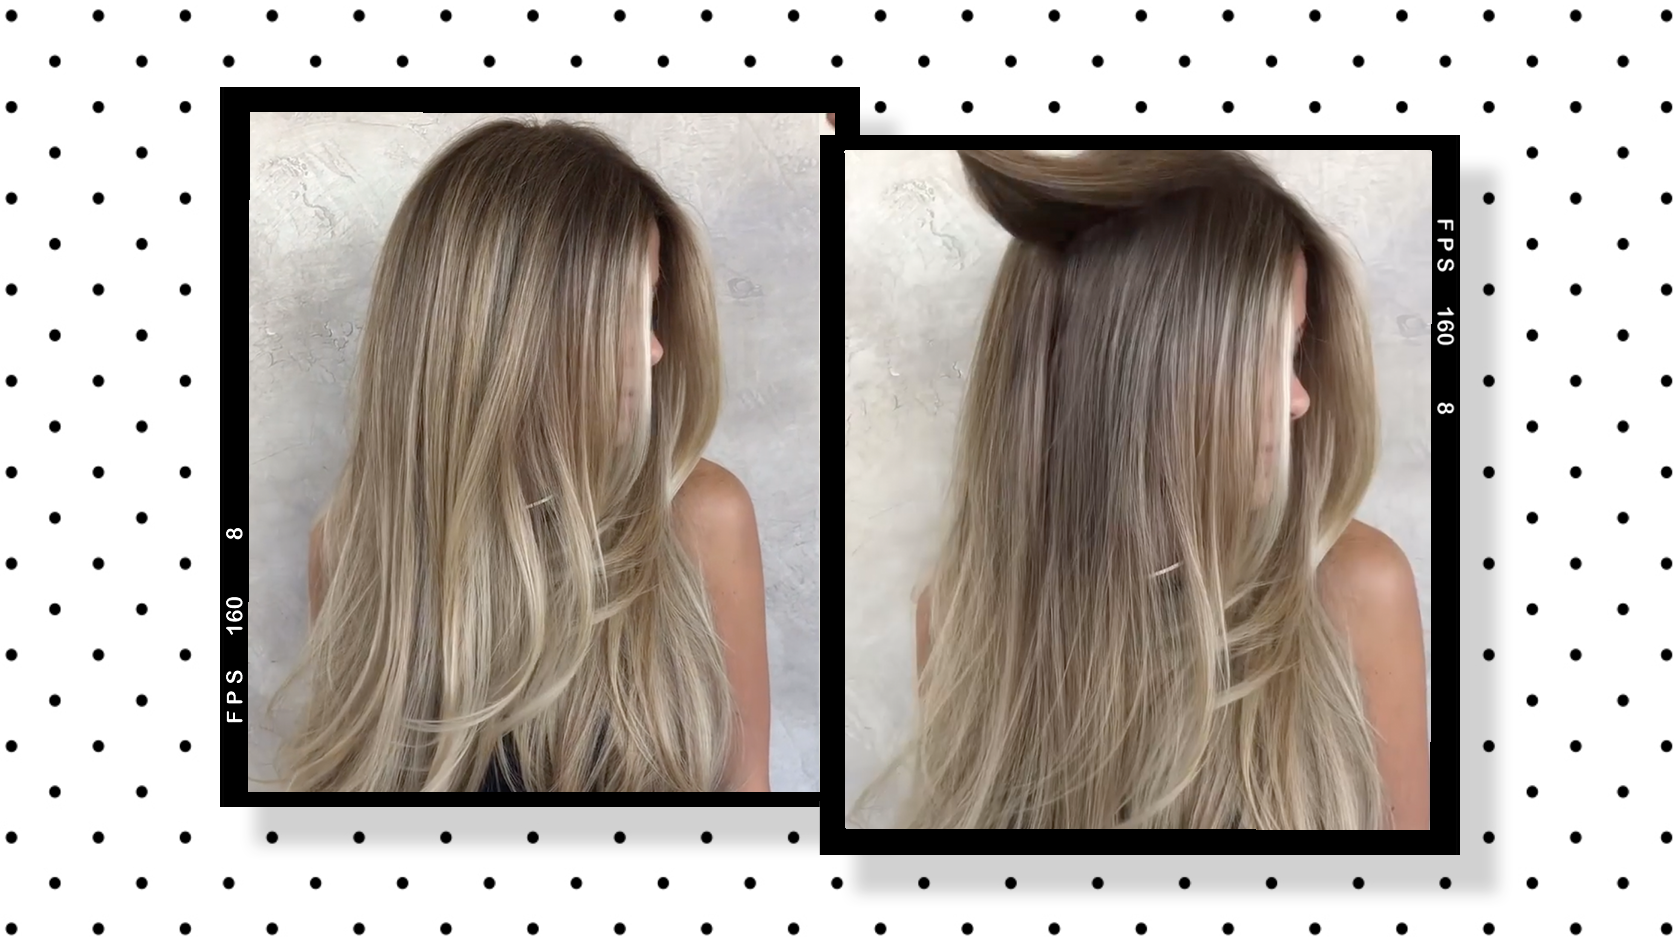 5. Balayage Techniques for Vanilla Blonde Hair - wide 1